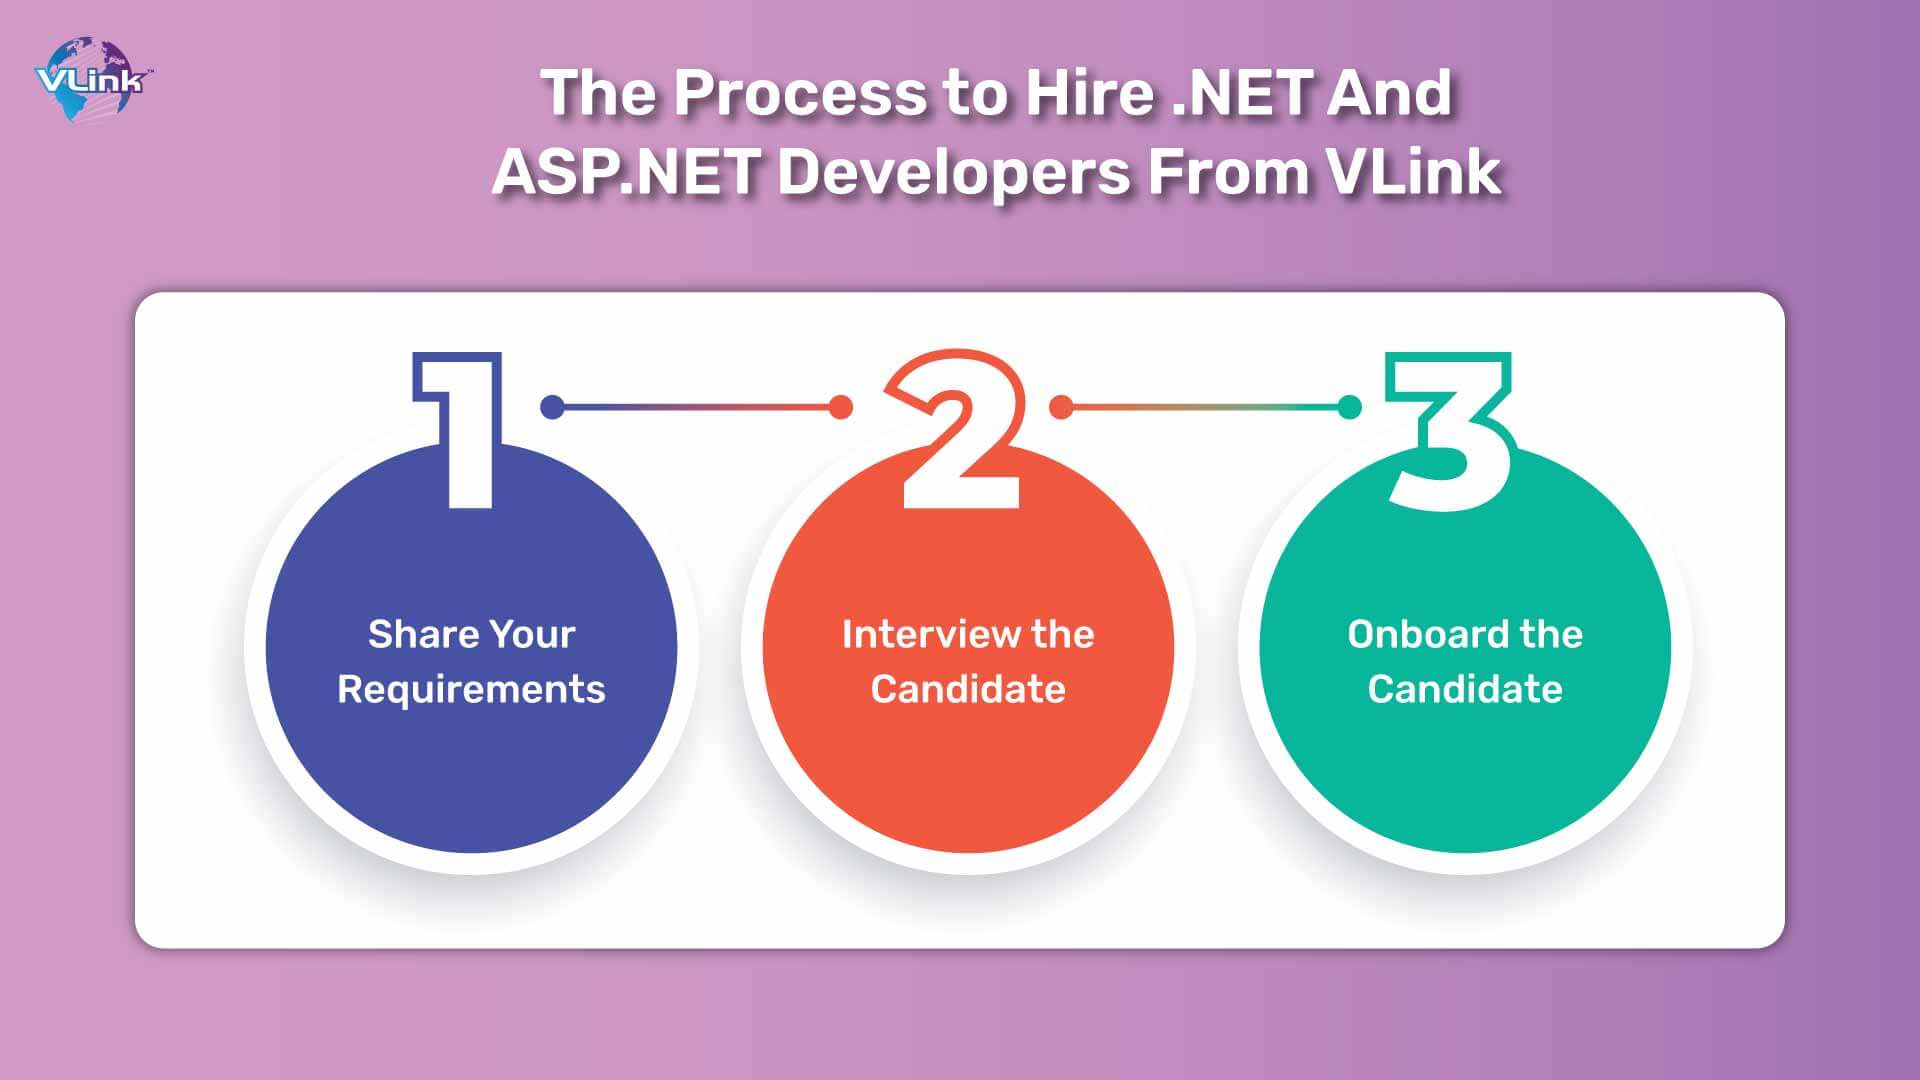 What Is the Process to Hire .NET and ASP.NET Developers